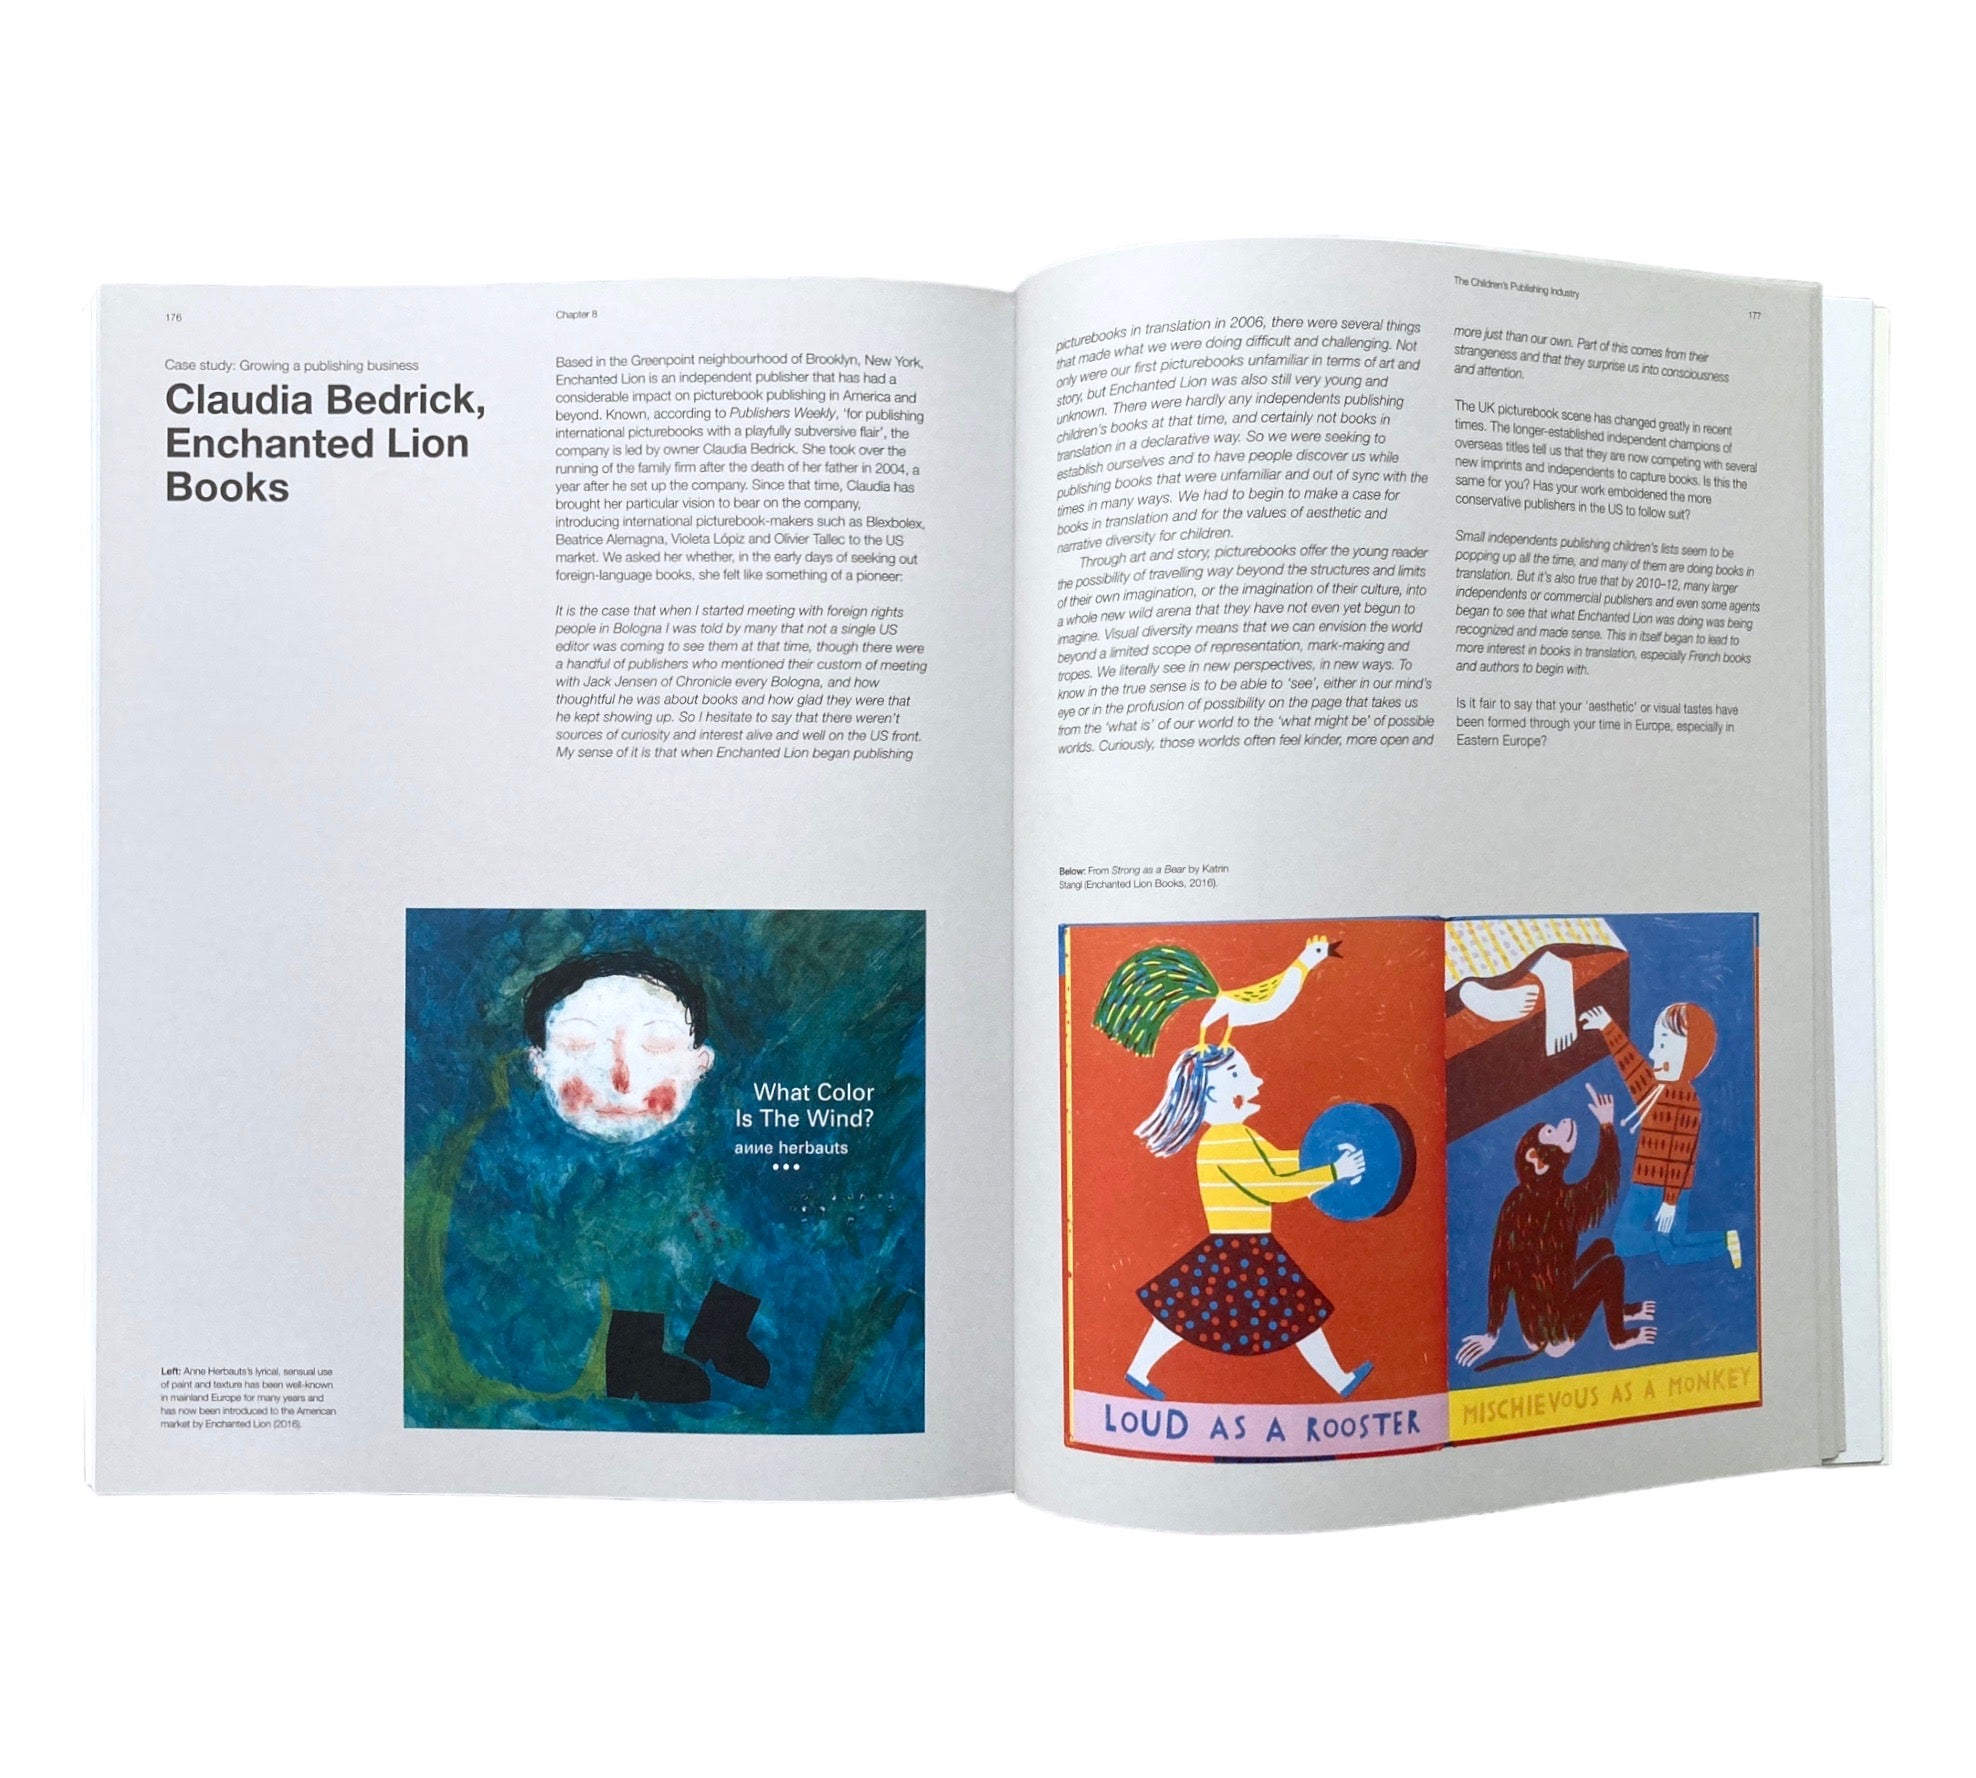 Children's Picturebooks: The Art of Visual Storytelling (Second Edition)